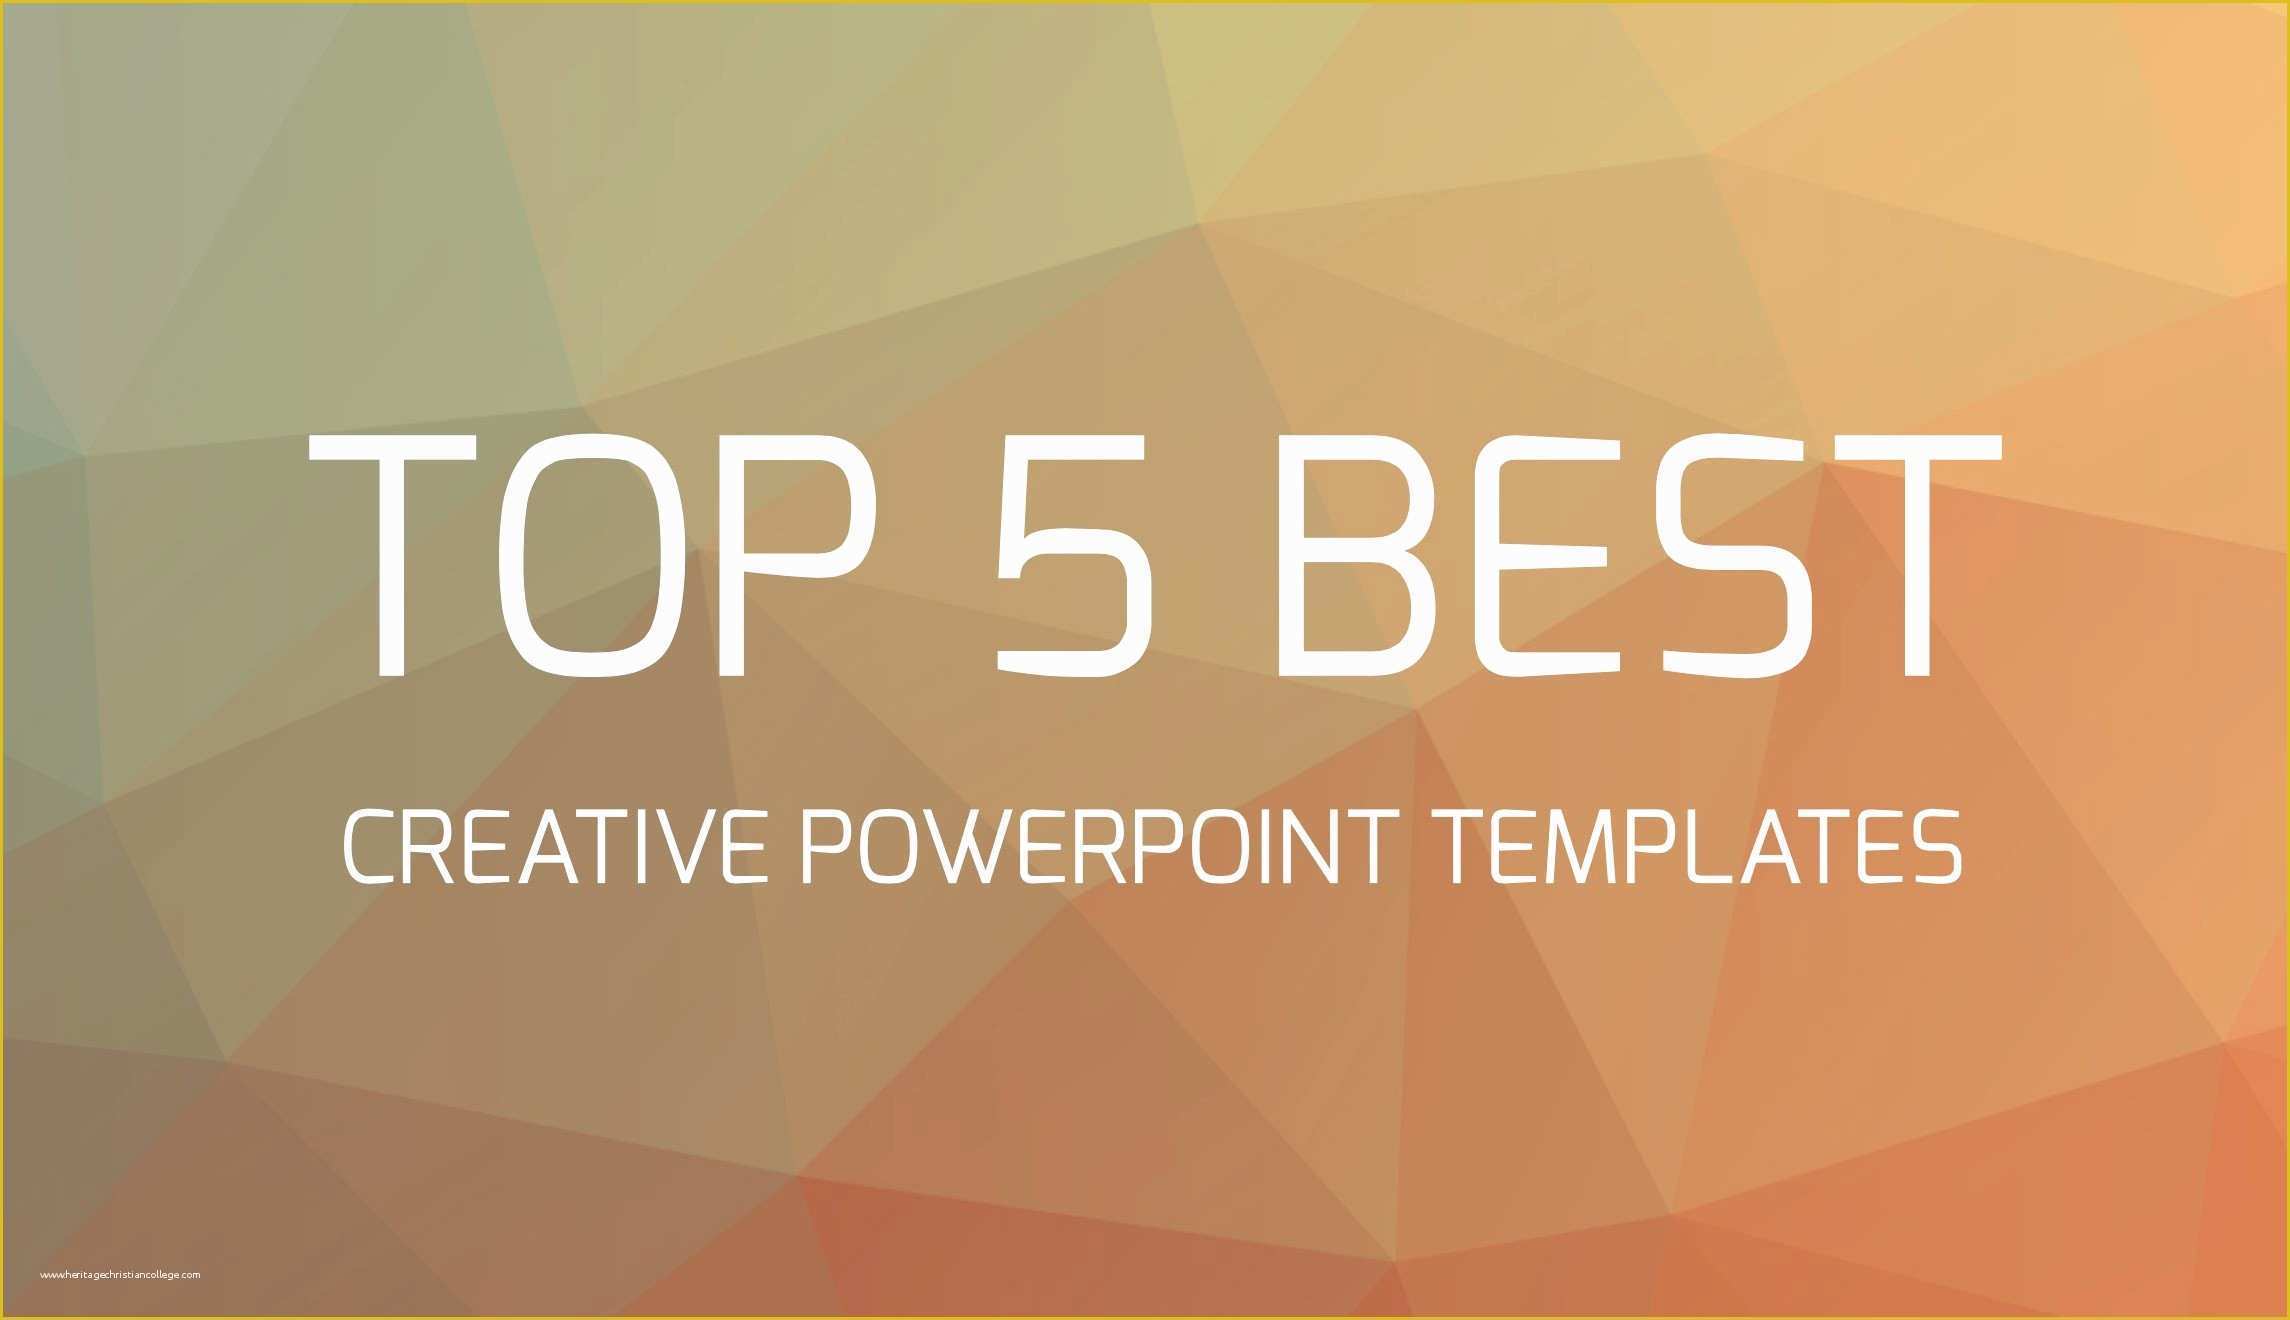 Free Design Thinking Powerpoint Template Of 42 Cool Powerpoint Backgrounds ·① Download Free Awesome